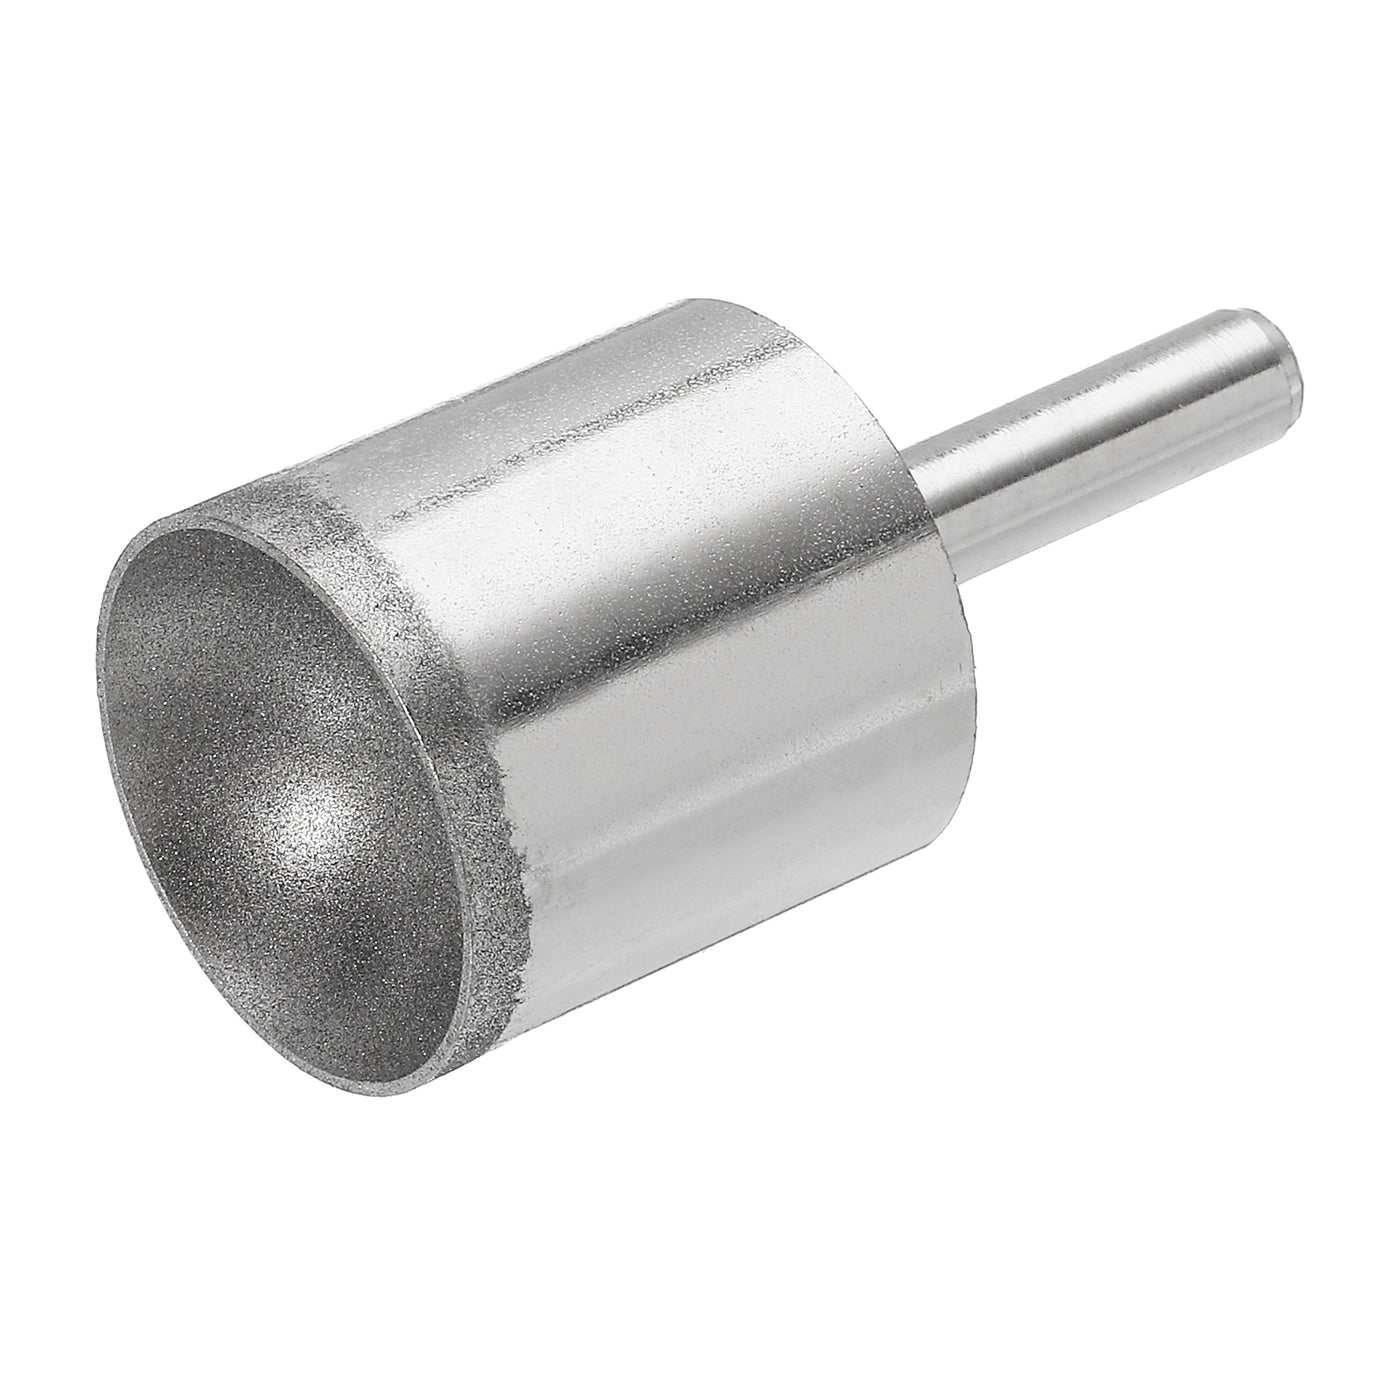 uxcell Uxcell 24mm 600 Grits Diamond Mounted Point Spherical Concave Head Bead Grinding Bit